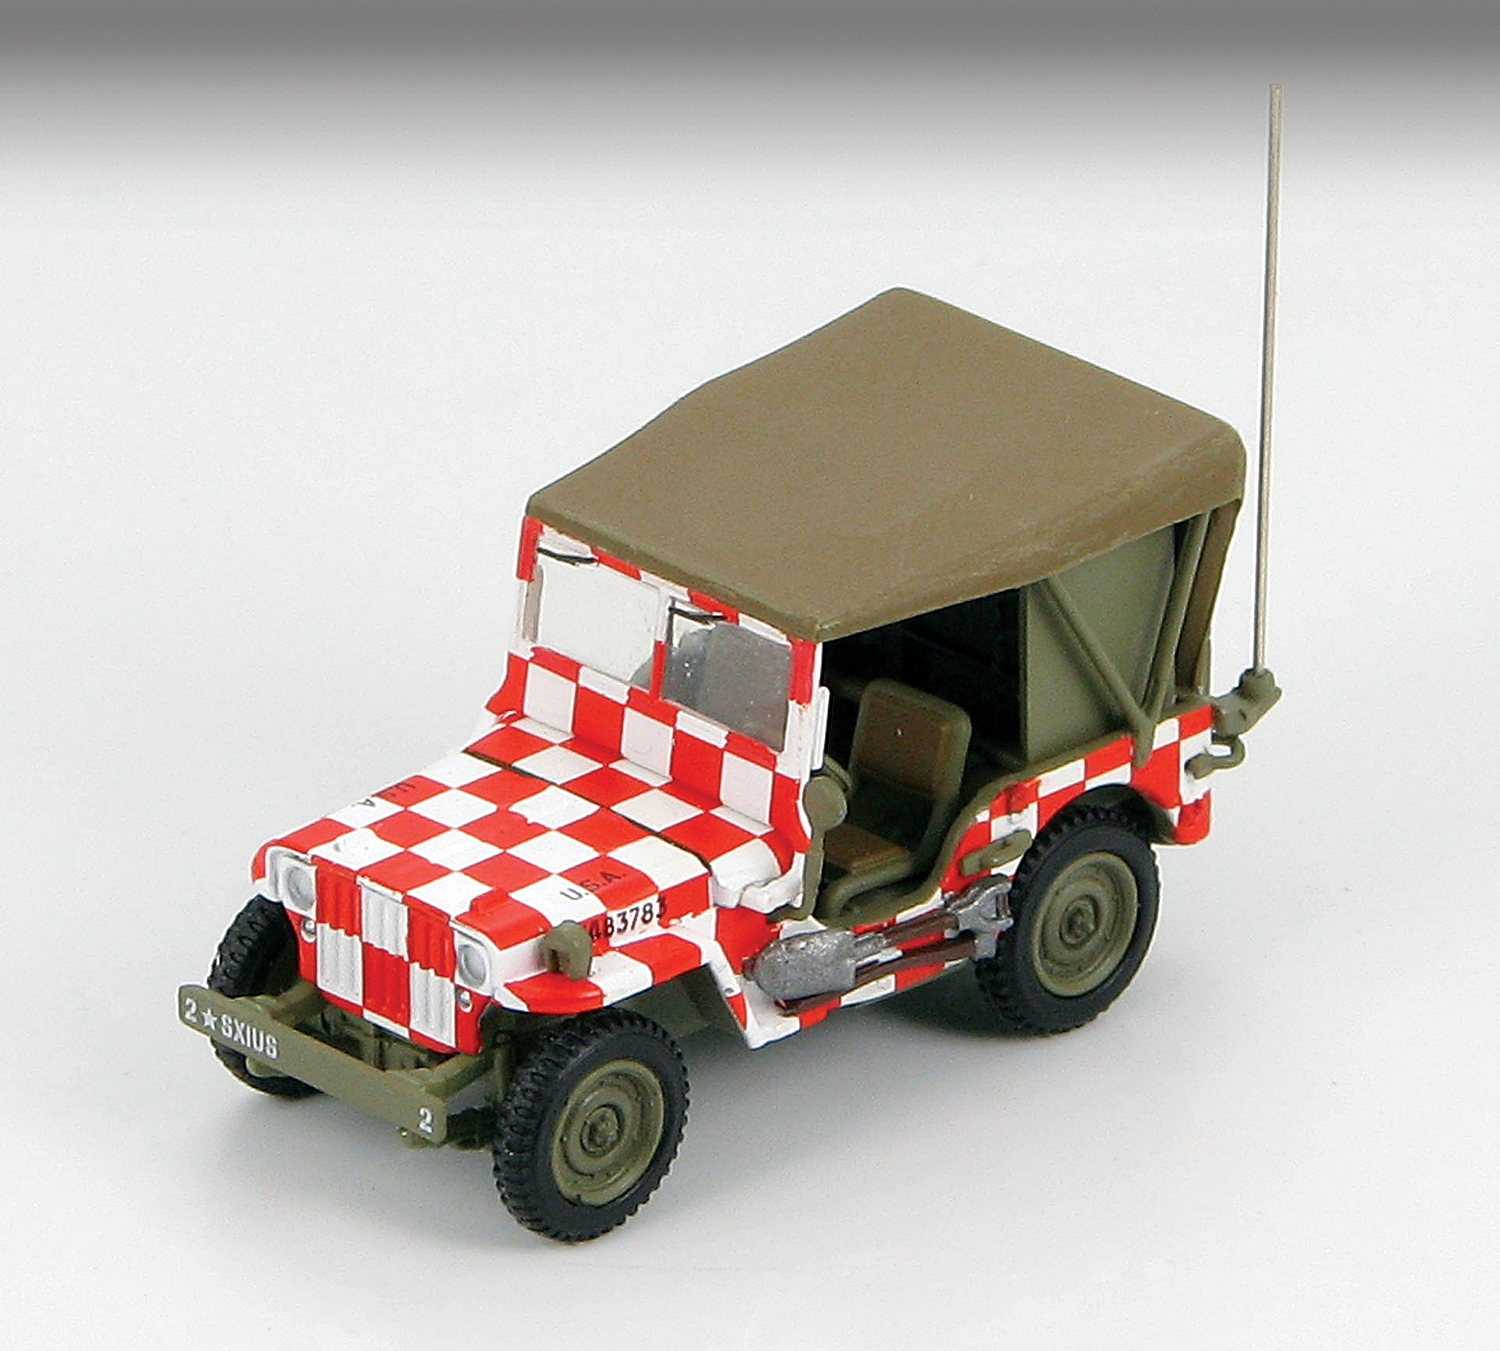 HG4209 Willys MB Jeep Airfield Jeep 172 Scale - Click Image to Close